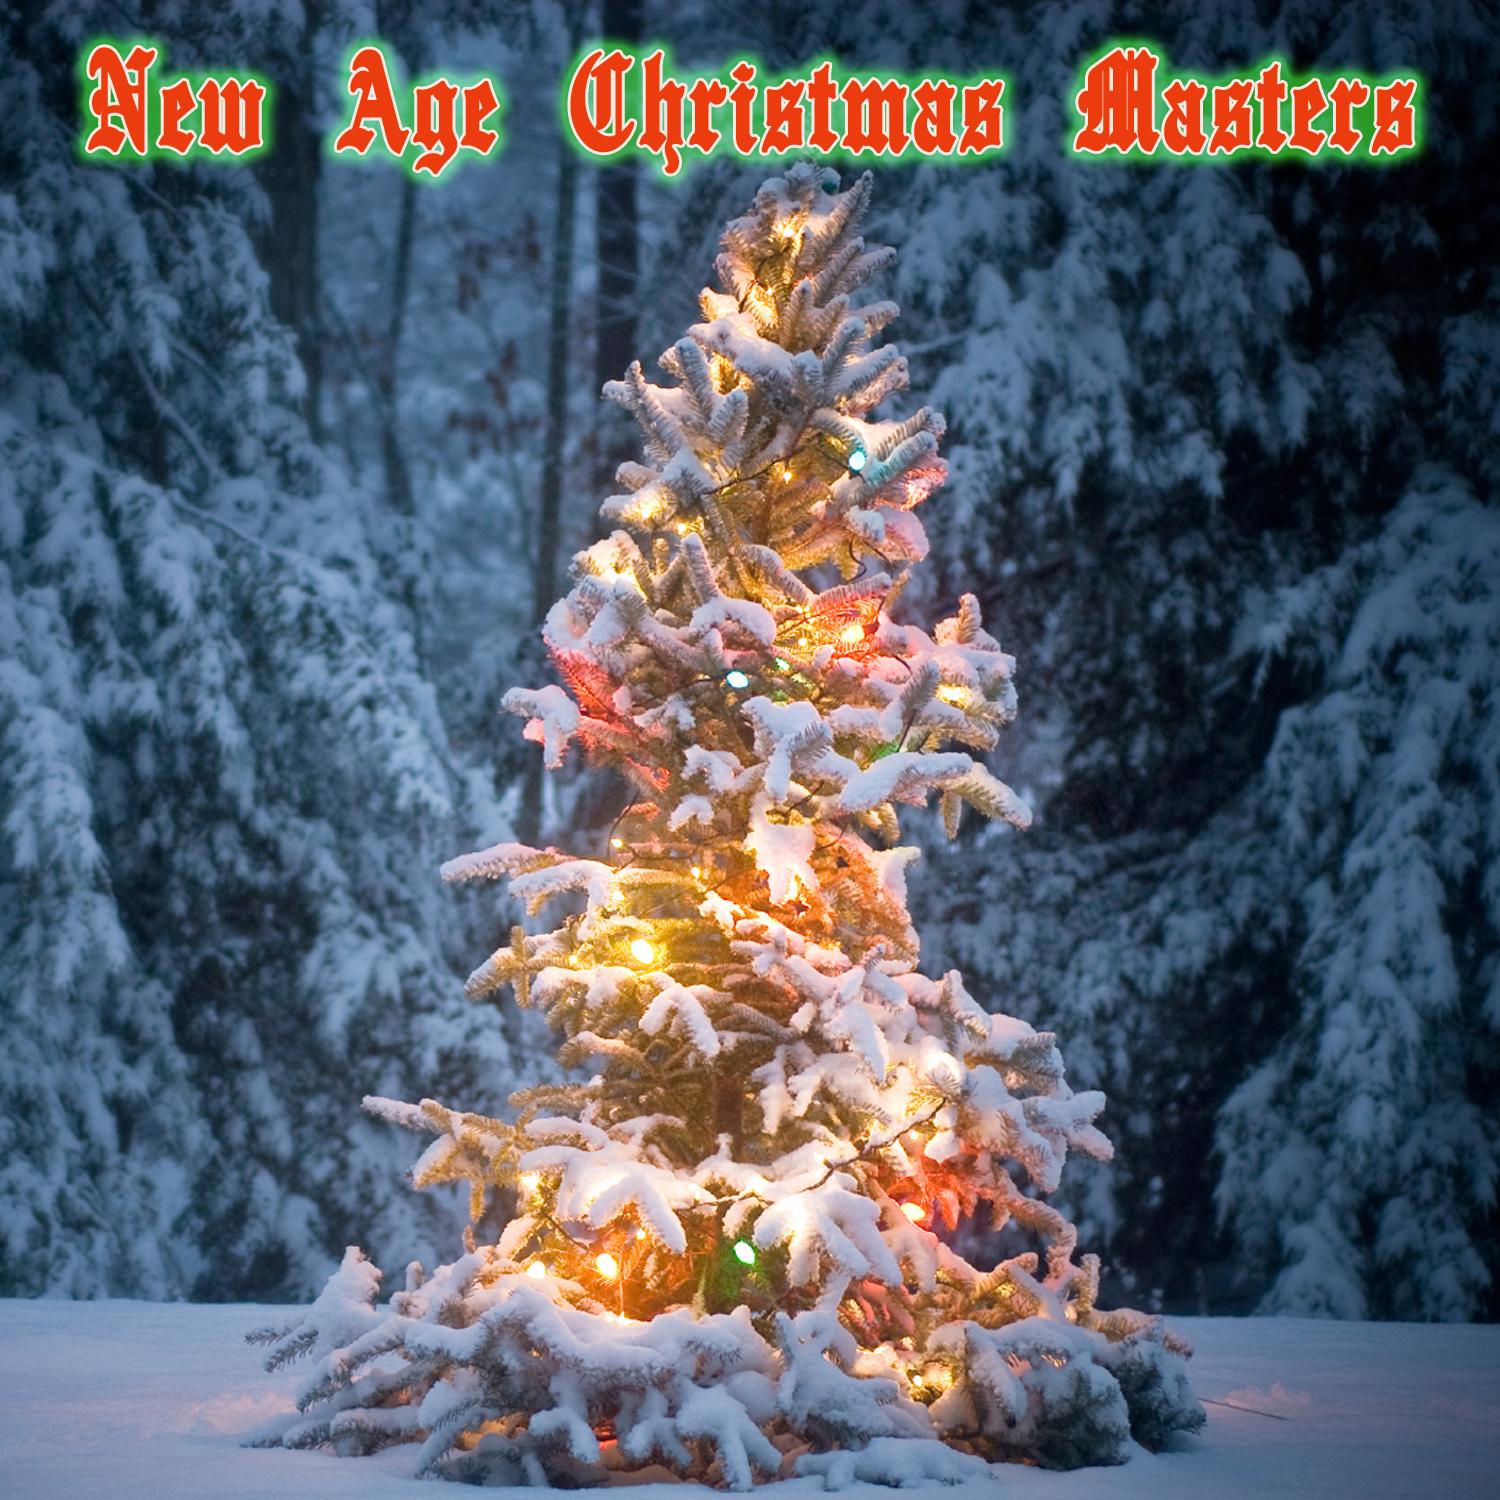 New Age Christmas Masters